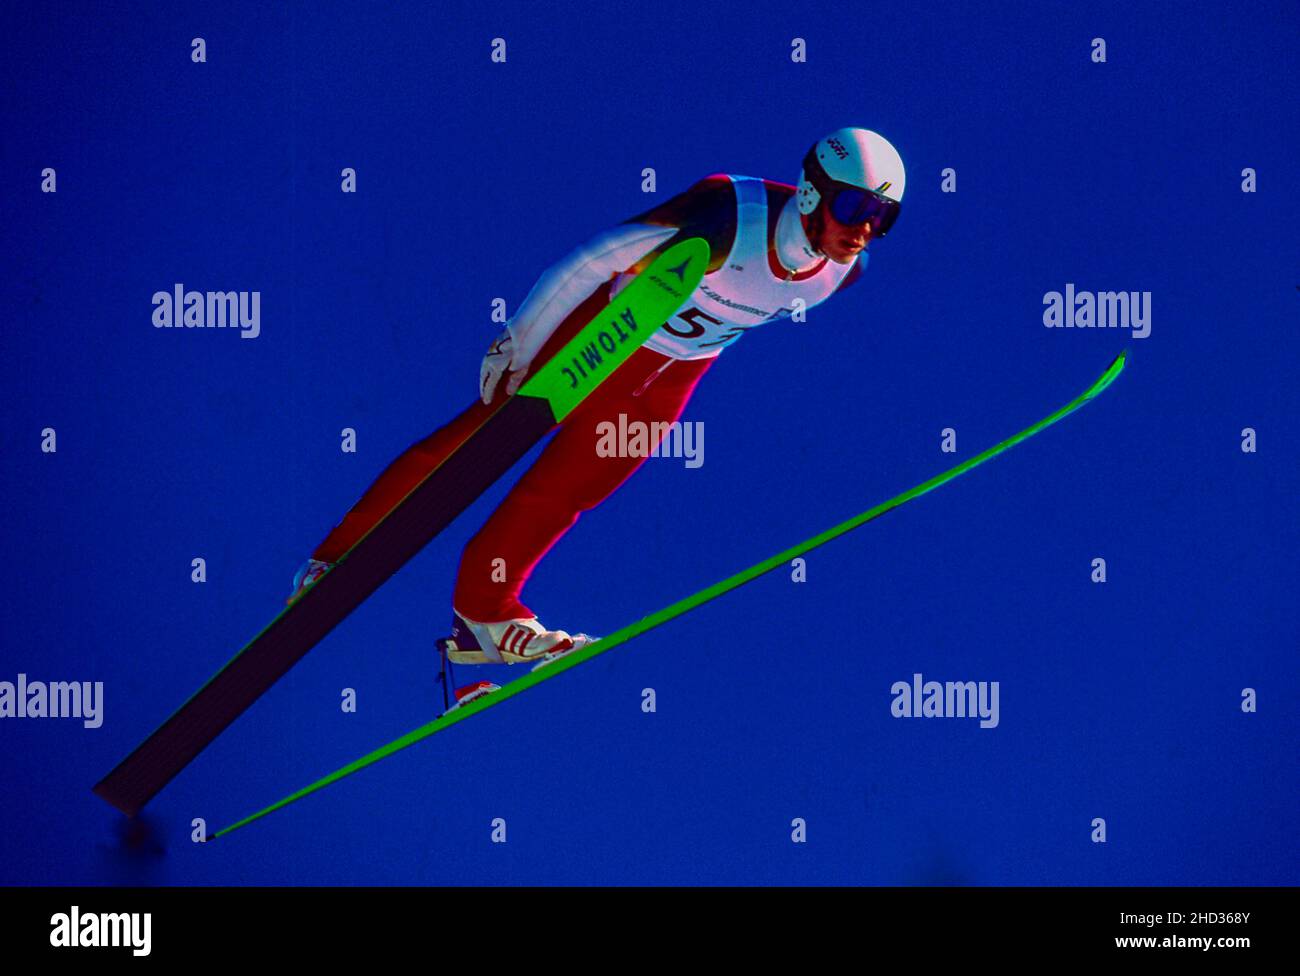 Mikael Martinsson (SWE) competing in the Men's K120 individual ski jumping at the 1994 Olympic Winter Games Stock Photo